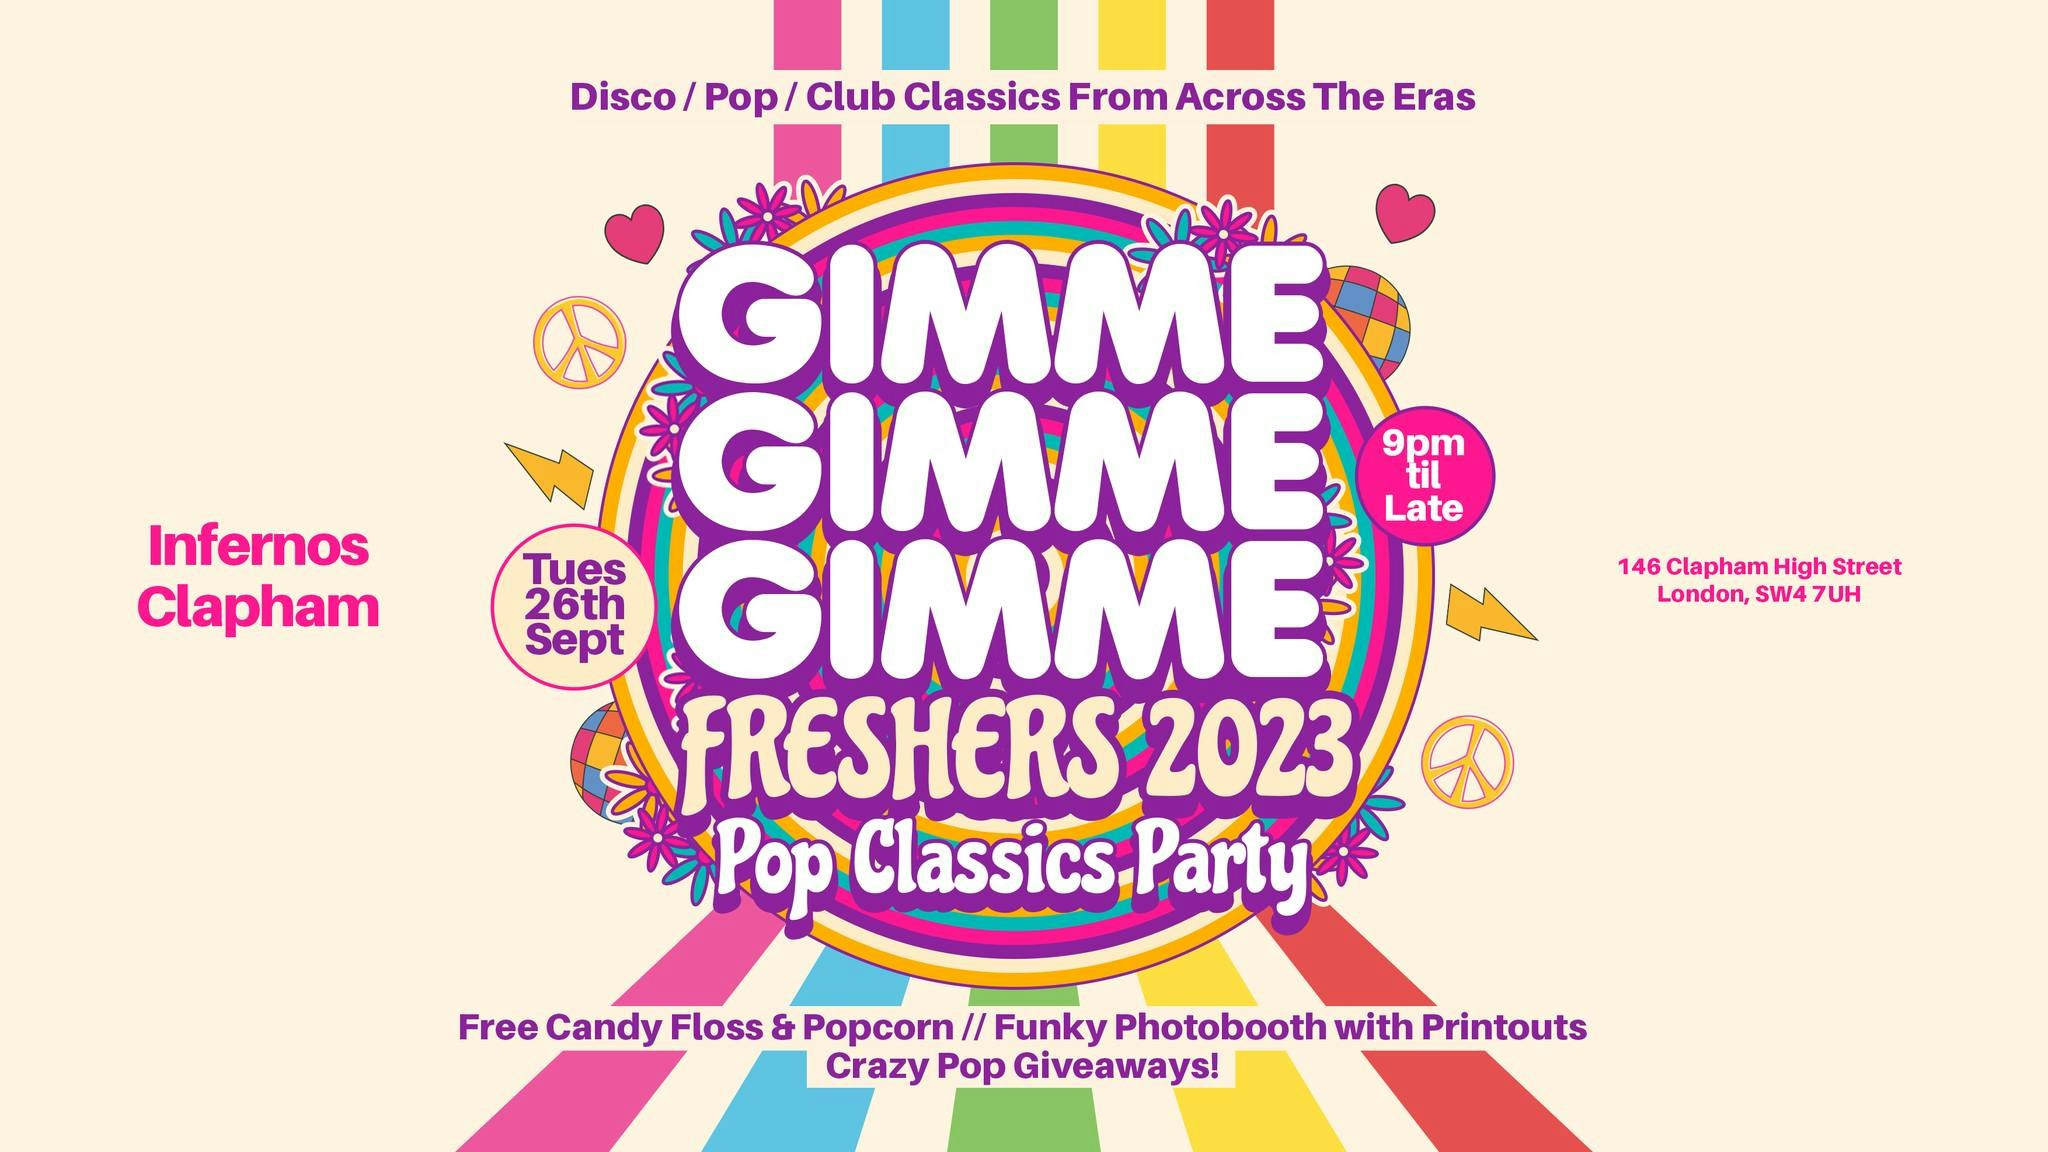 TONIGHT! GIMME GIMME GIMME – The Ultimate Pop Freshers Party!